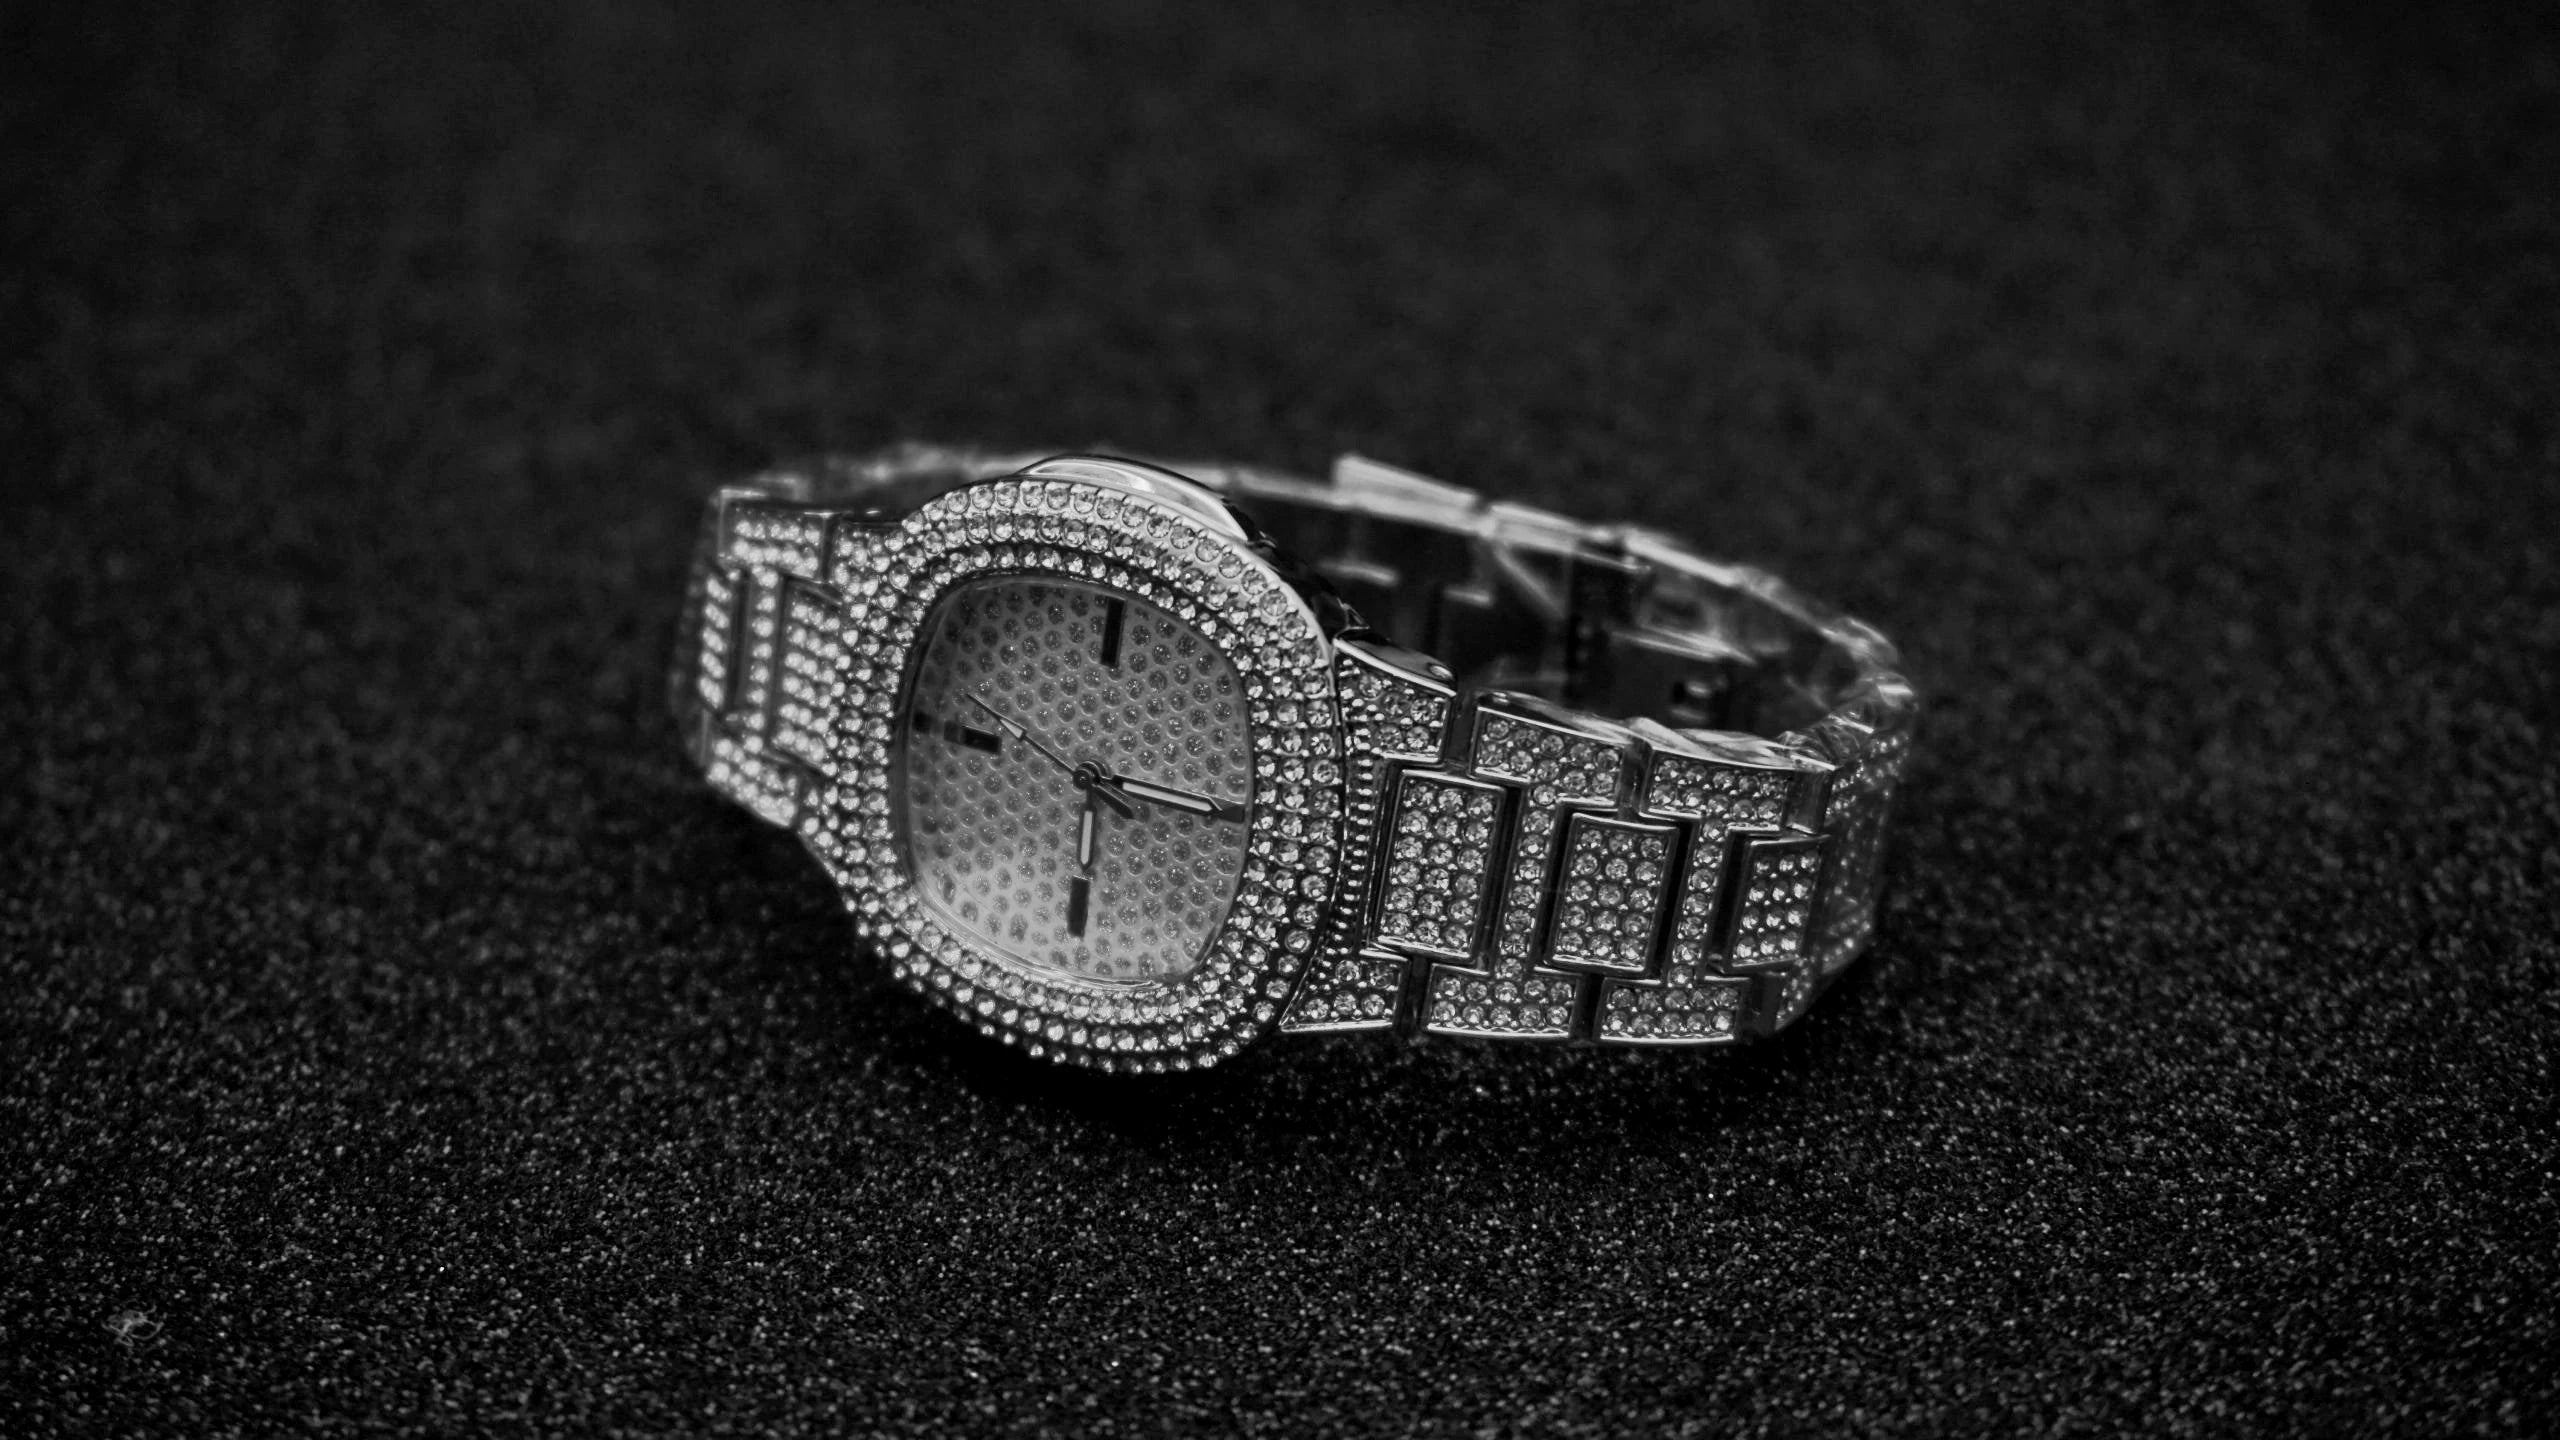 Silver Mini Choppers Iced Out Watch